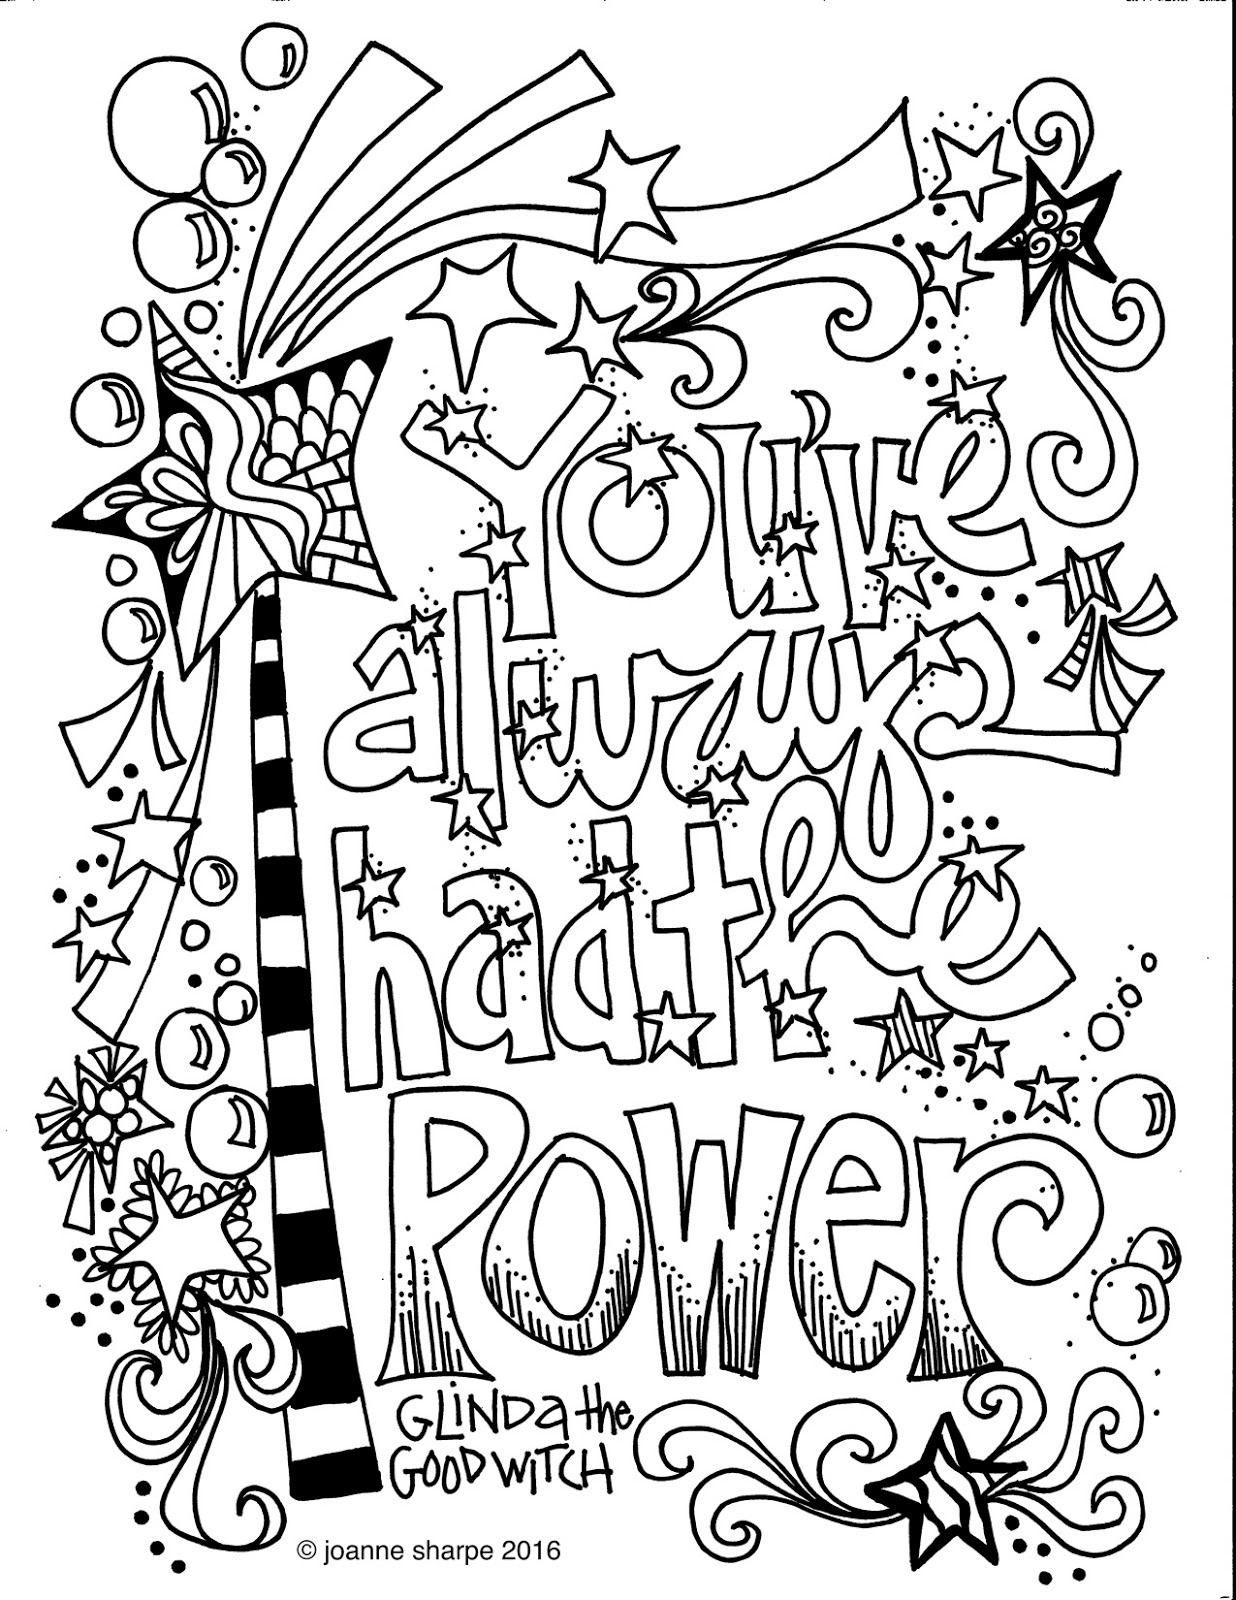 Printable Adult Coloring Pages Quotes
 Whimspirations WHIMSICAL WEDNESDAY "Color Power"